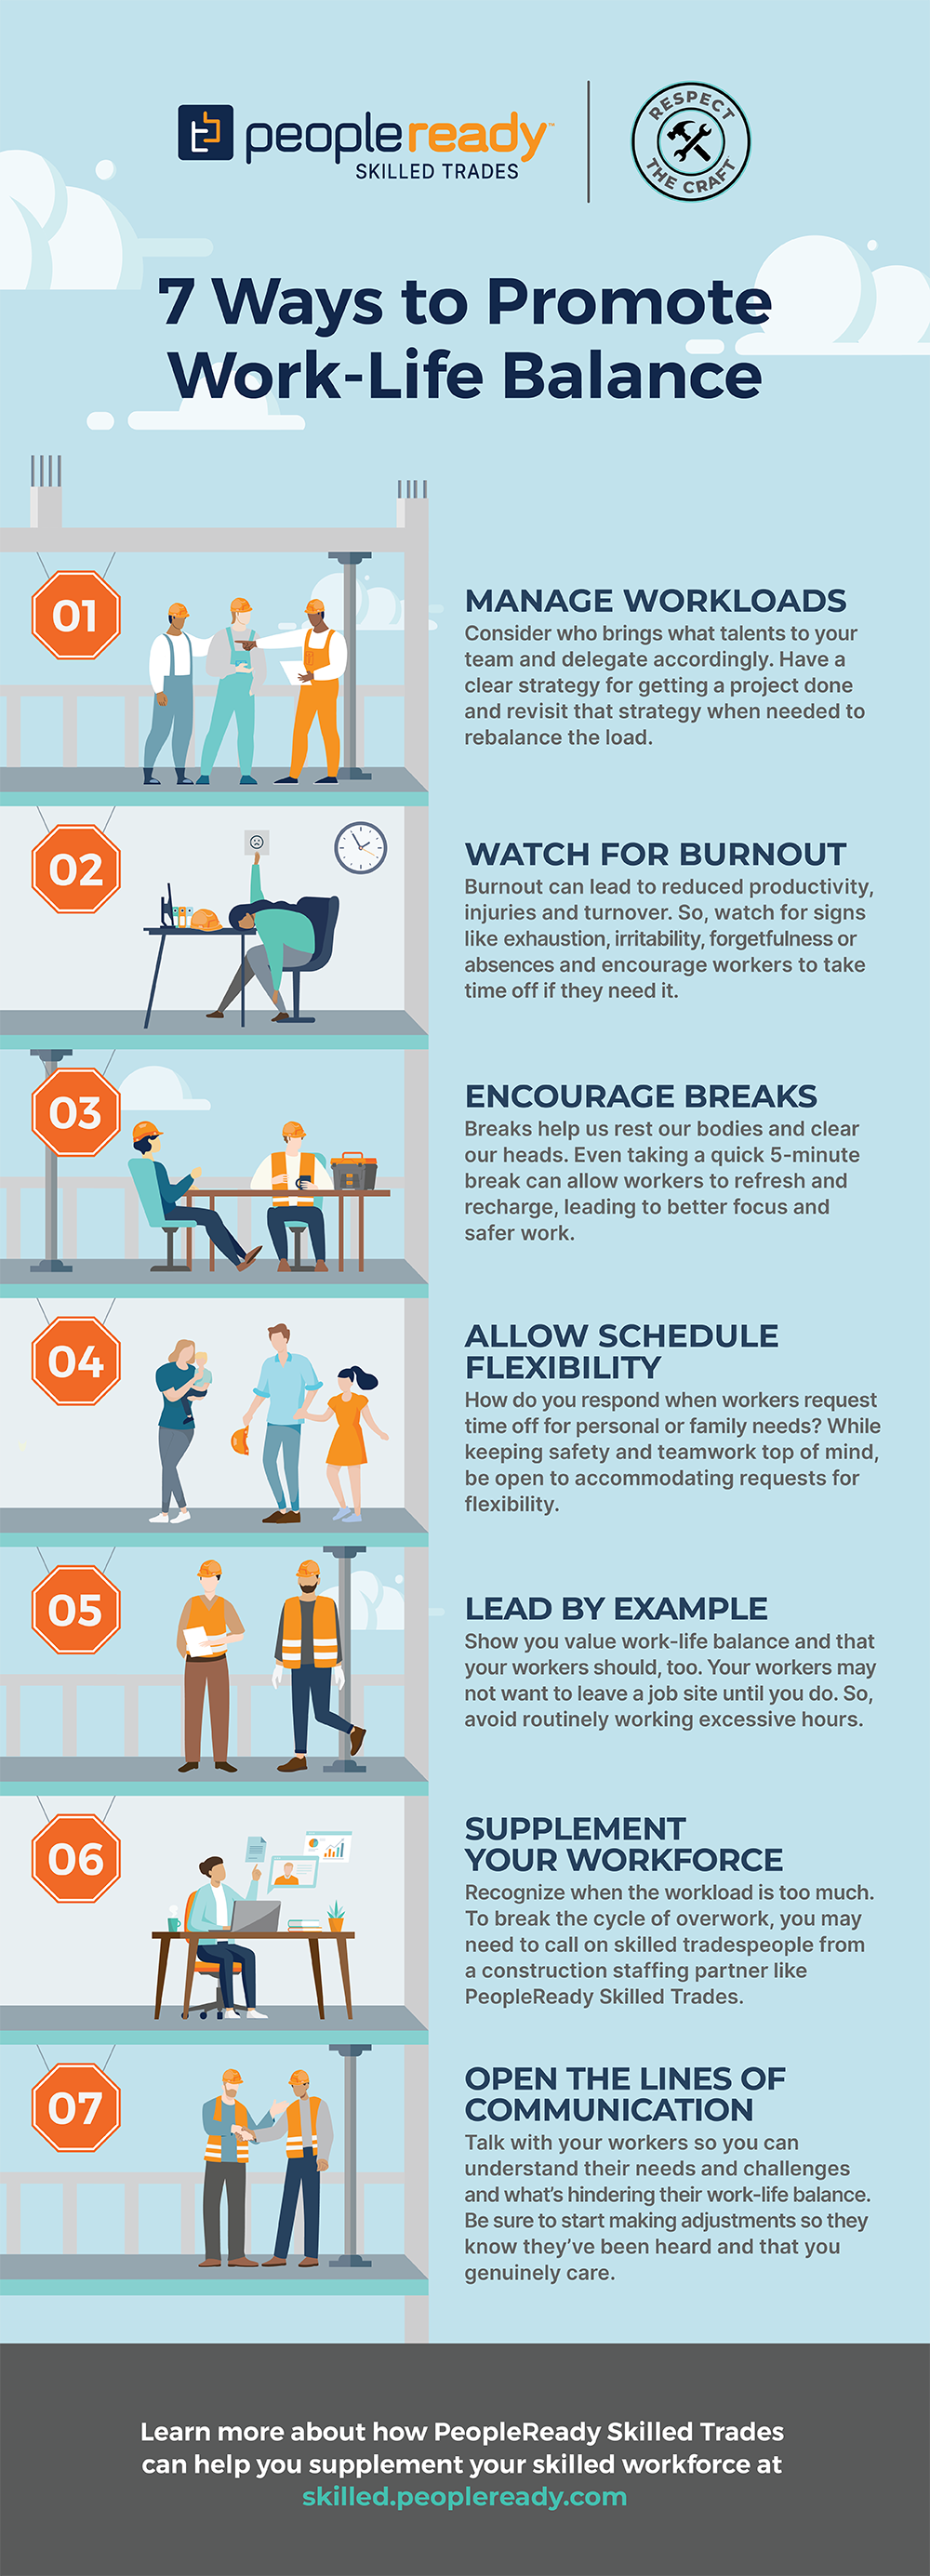 Infographic illustrating and describing 7 steps to promoting work-life balance for skilled workers.